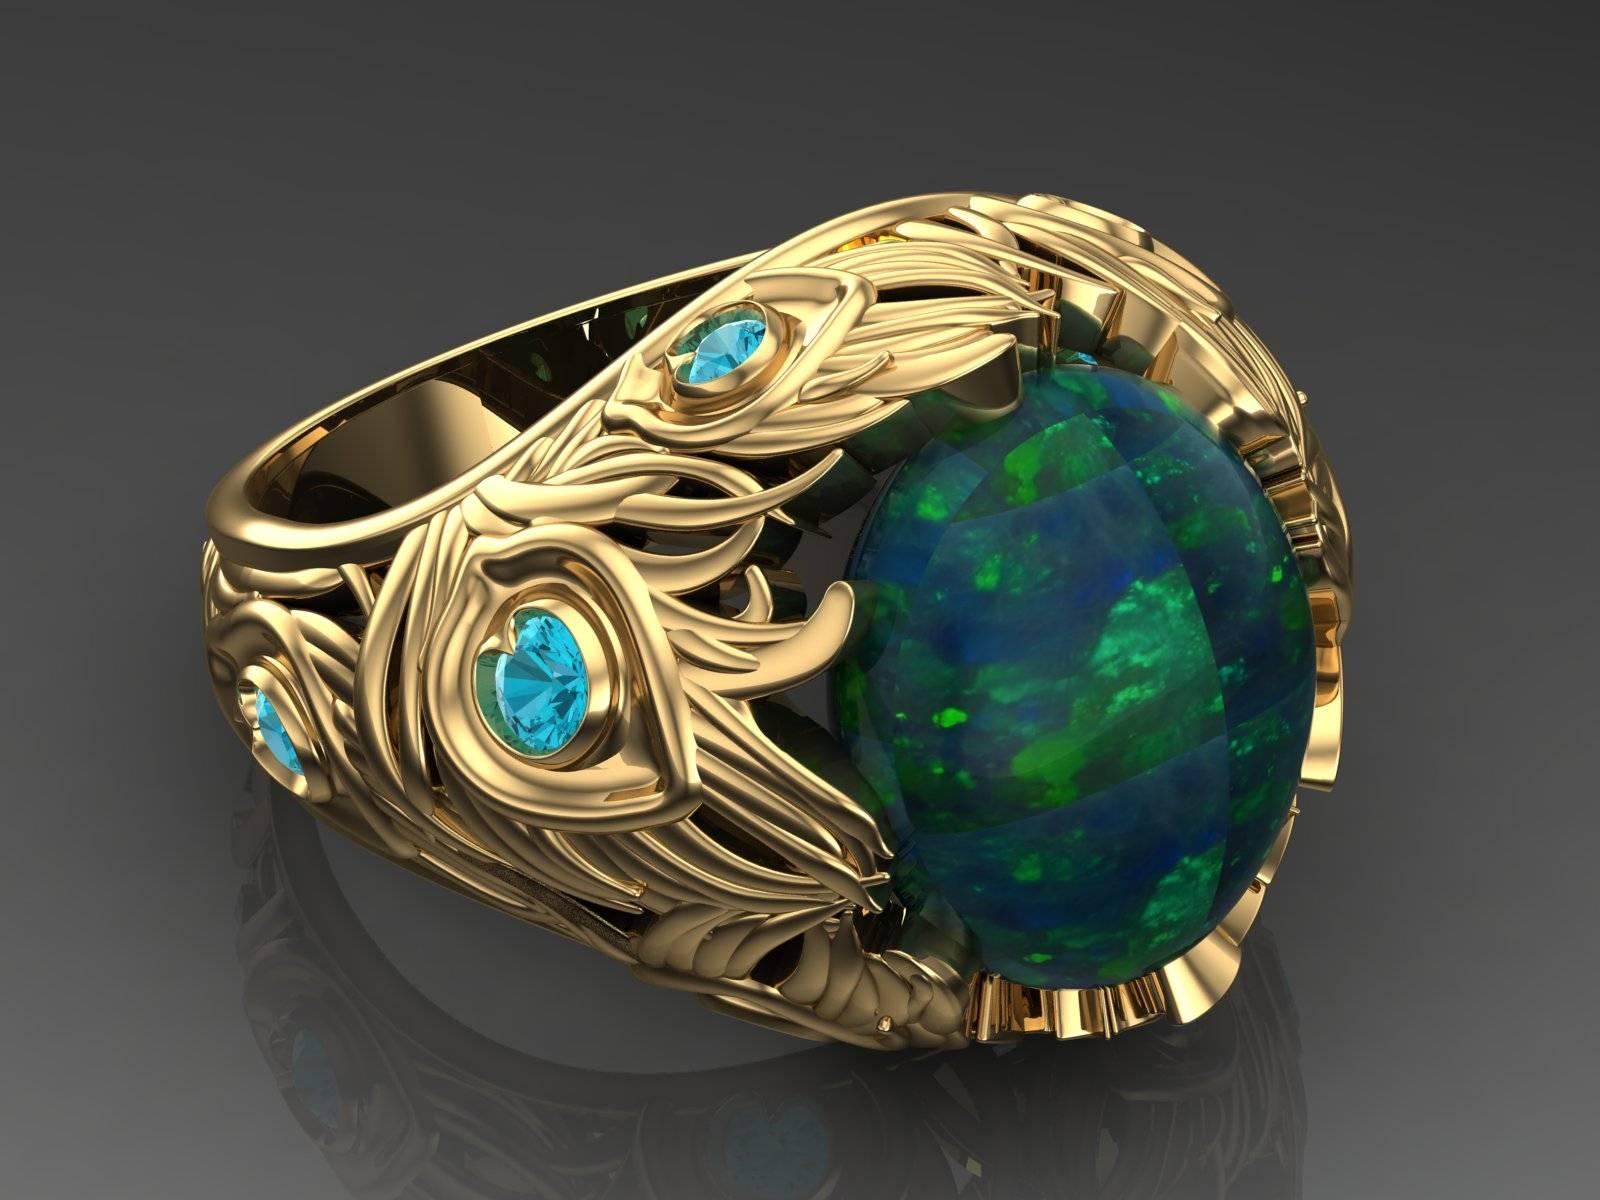 3.82 Carat Black Opal with Paraiba Tourmaline Peacock Ring in 18K Yellow Gold 1